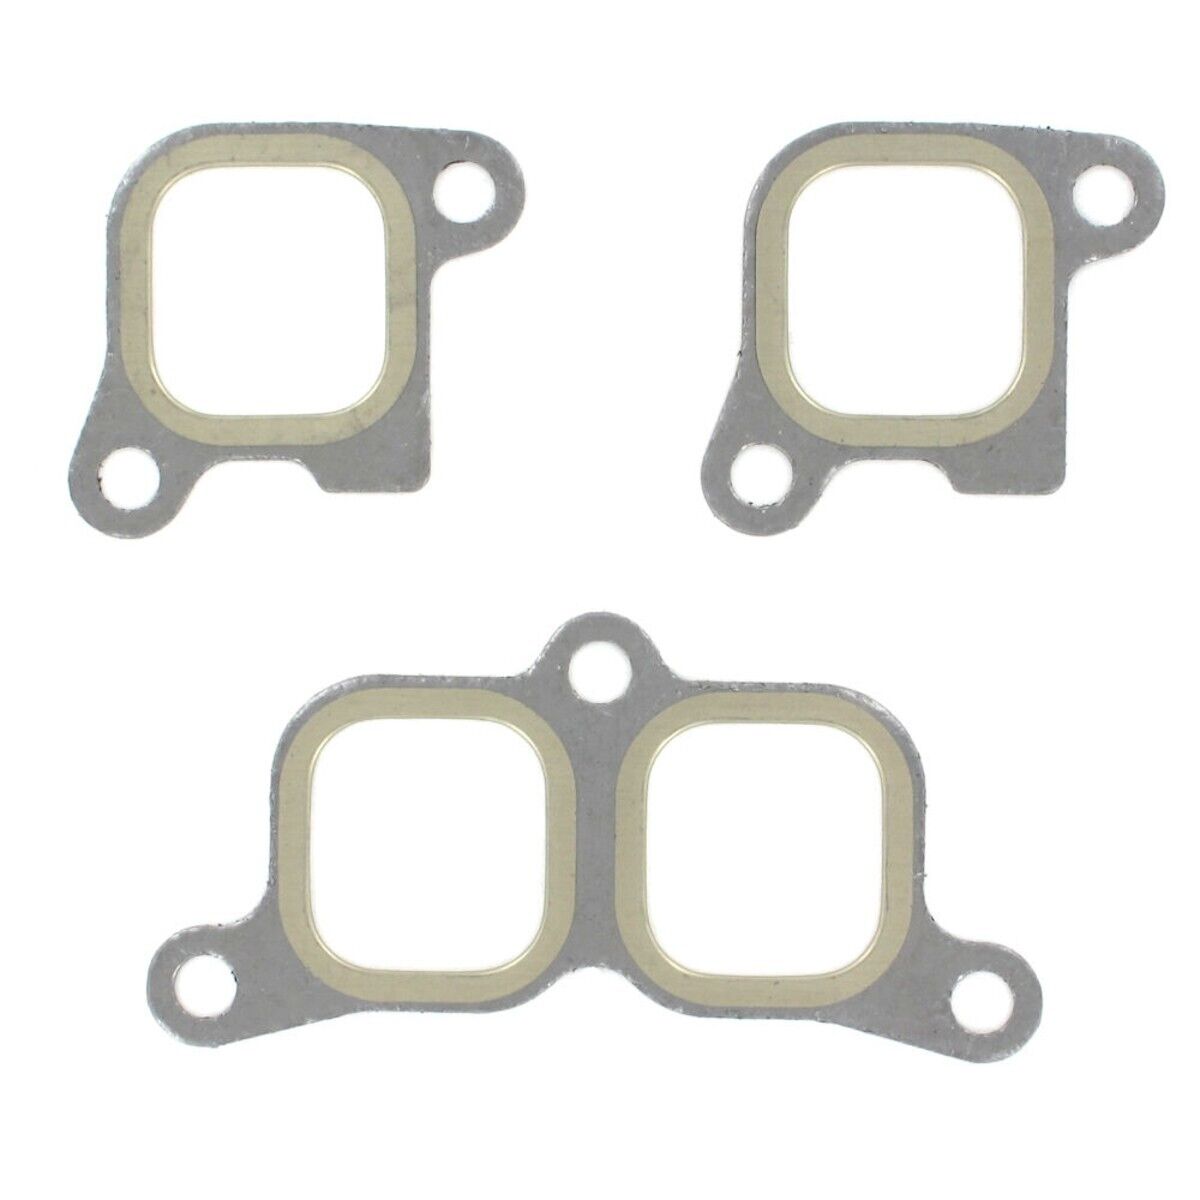 AMS3031 APEX Set Exhaust Manifold Gaskets for Chevy S10 Pickup S-10 BLAZER S15